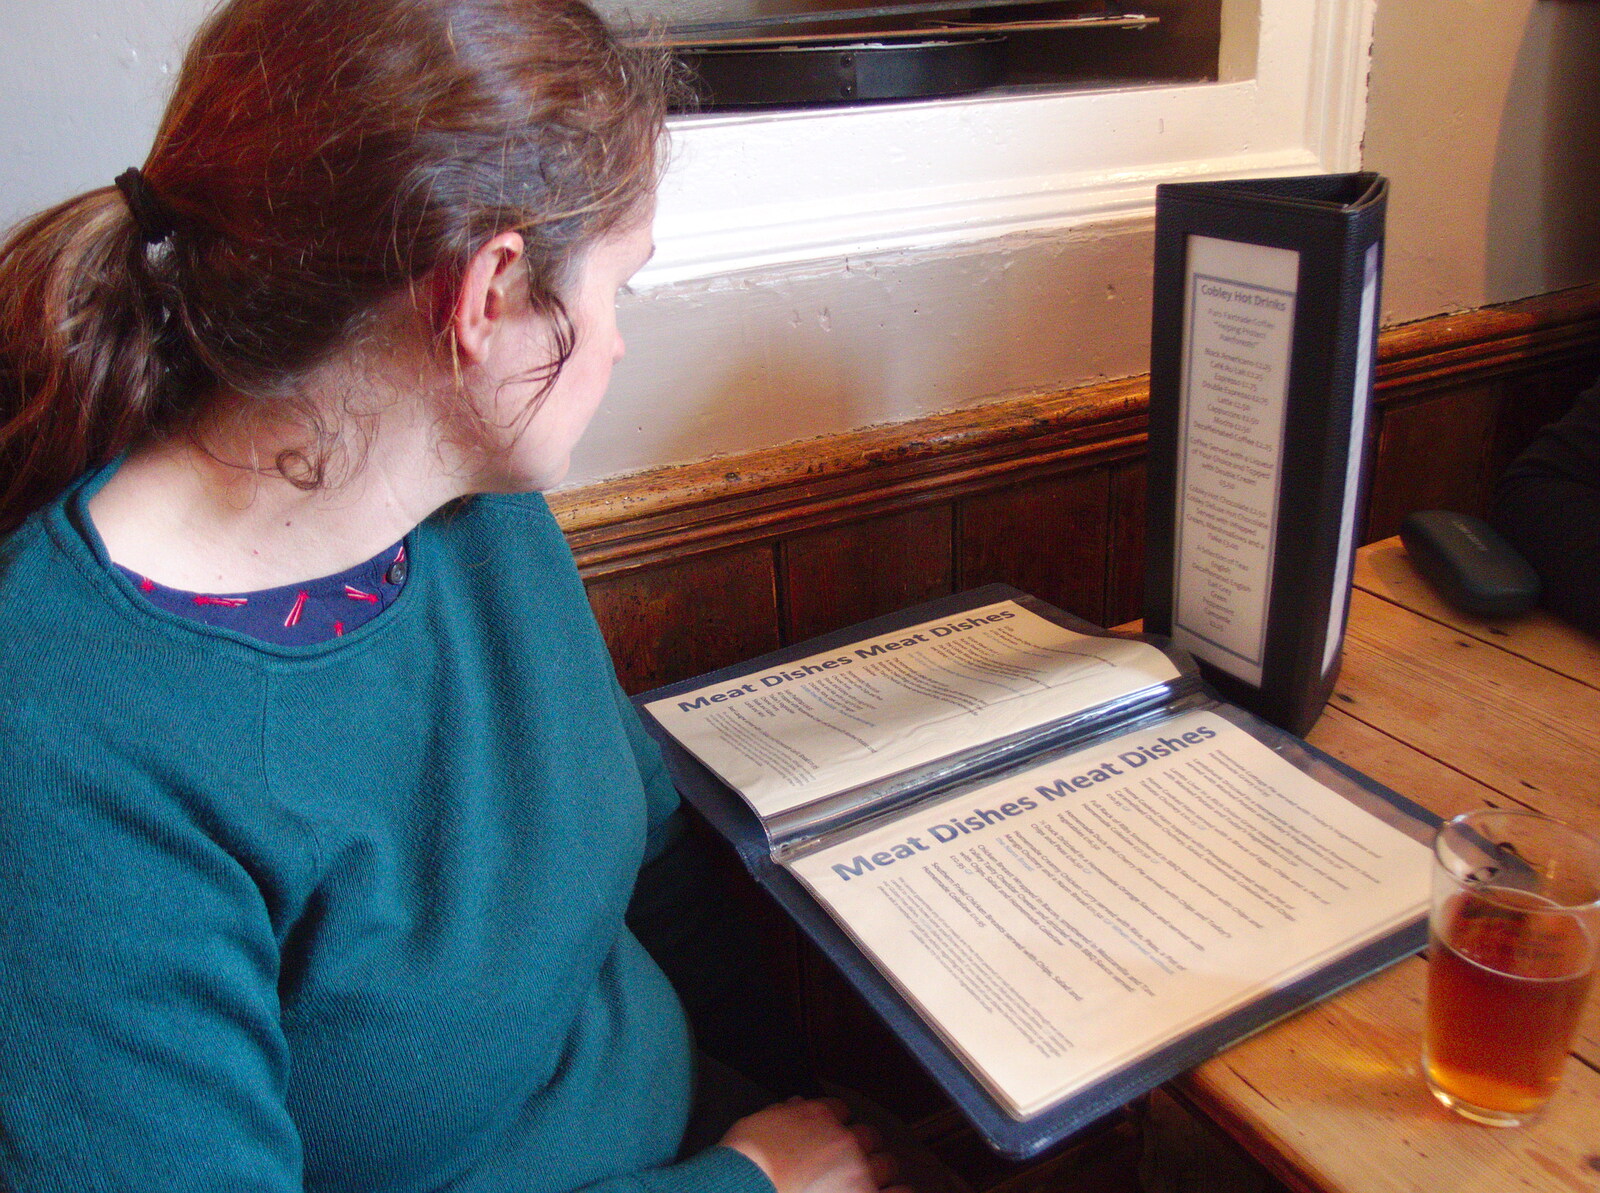 Isobel scopes out the Cobley's menu from The Tom Cobley and a Return to Haytor, Bovey Tracey, Devon - 27th May 2019